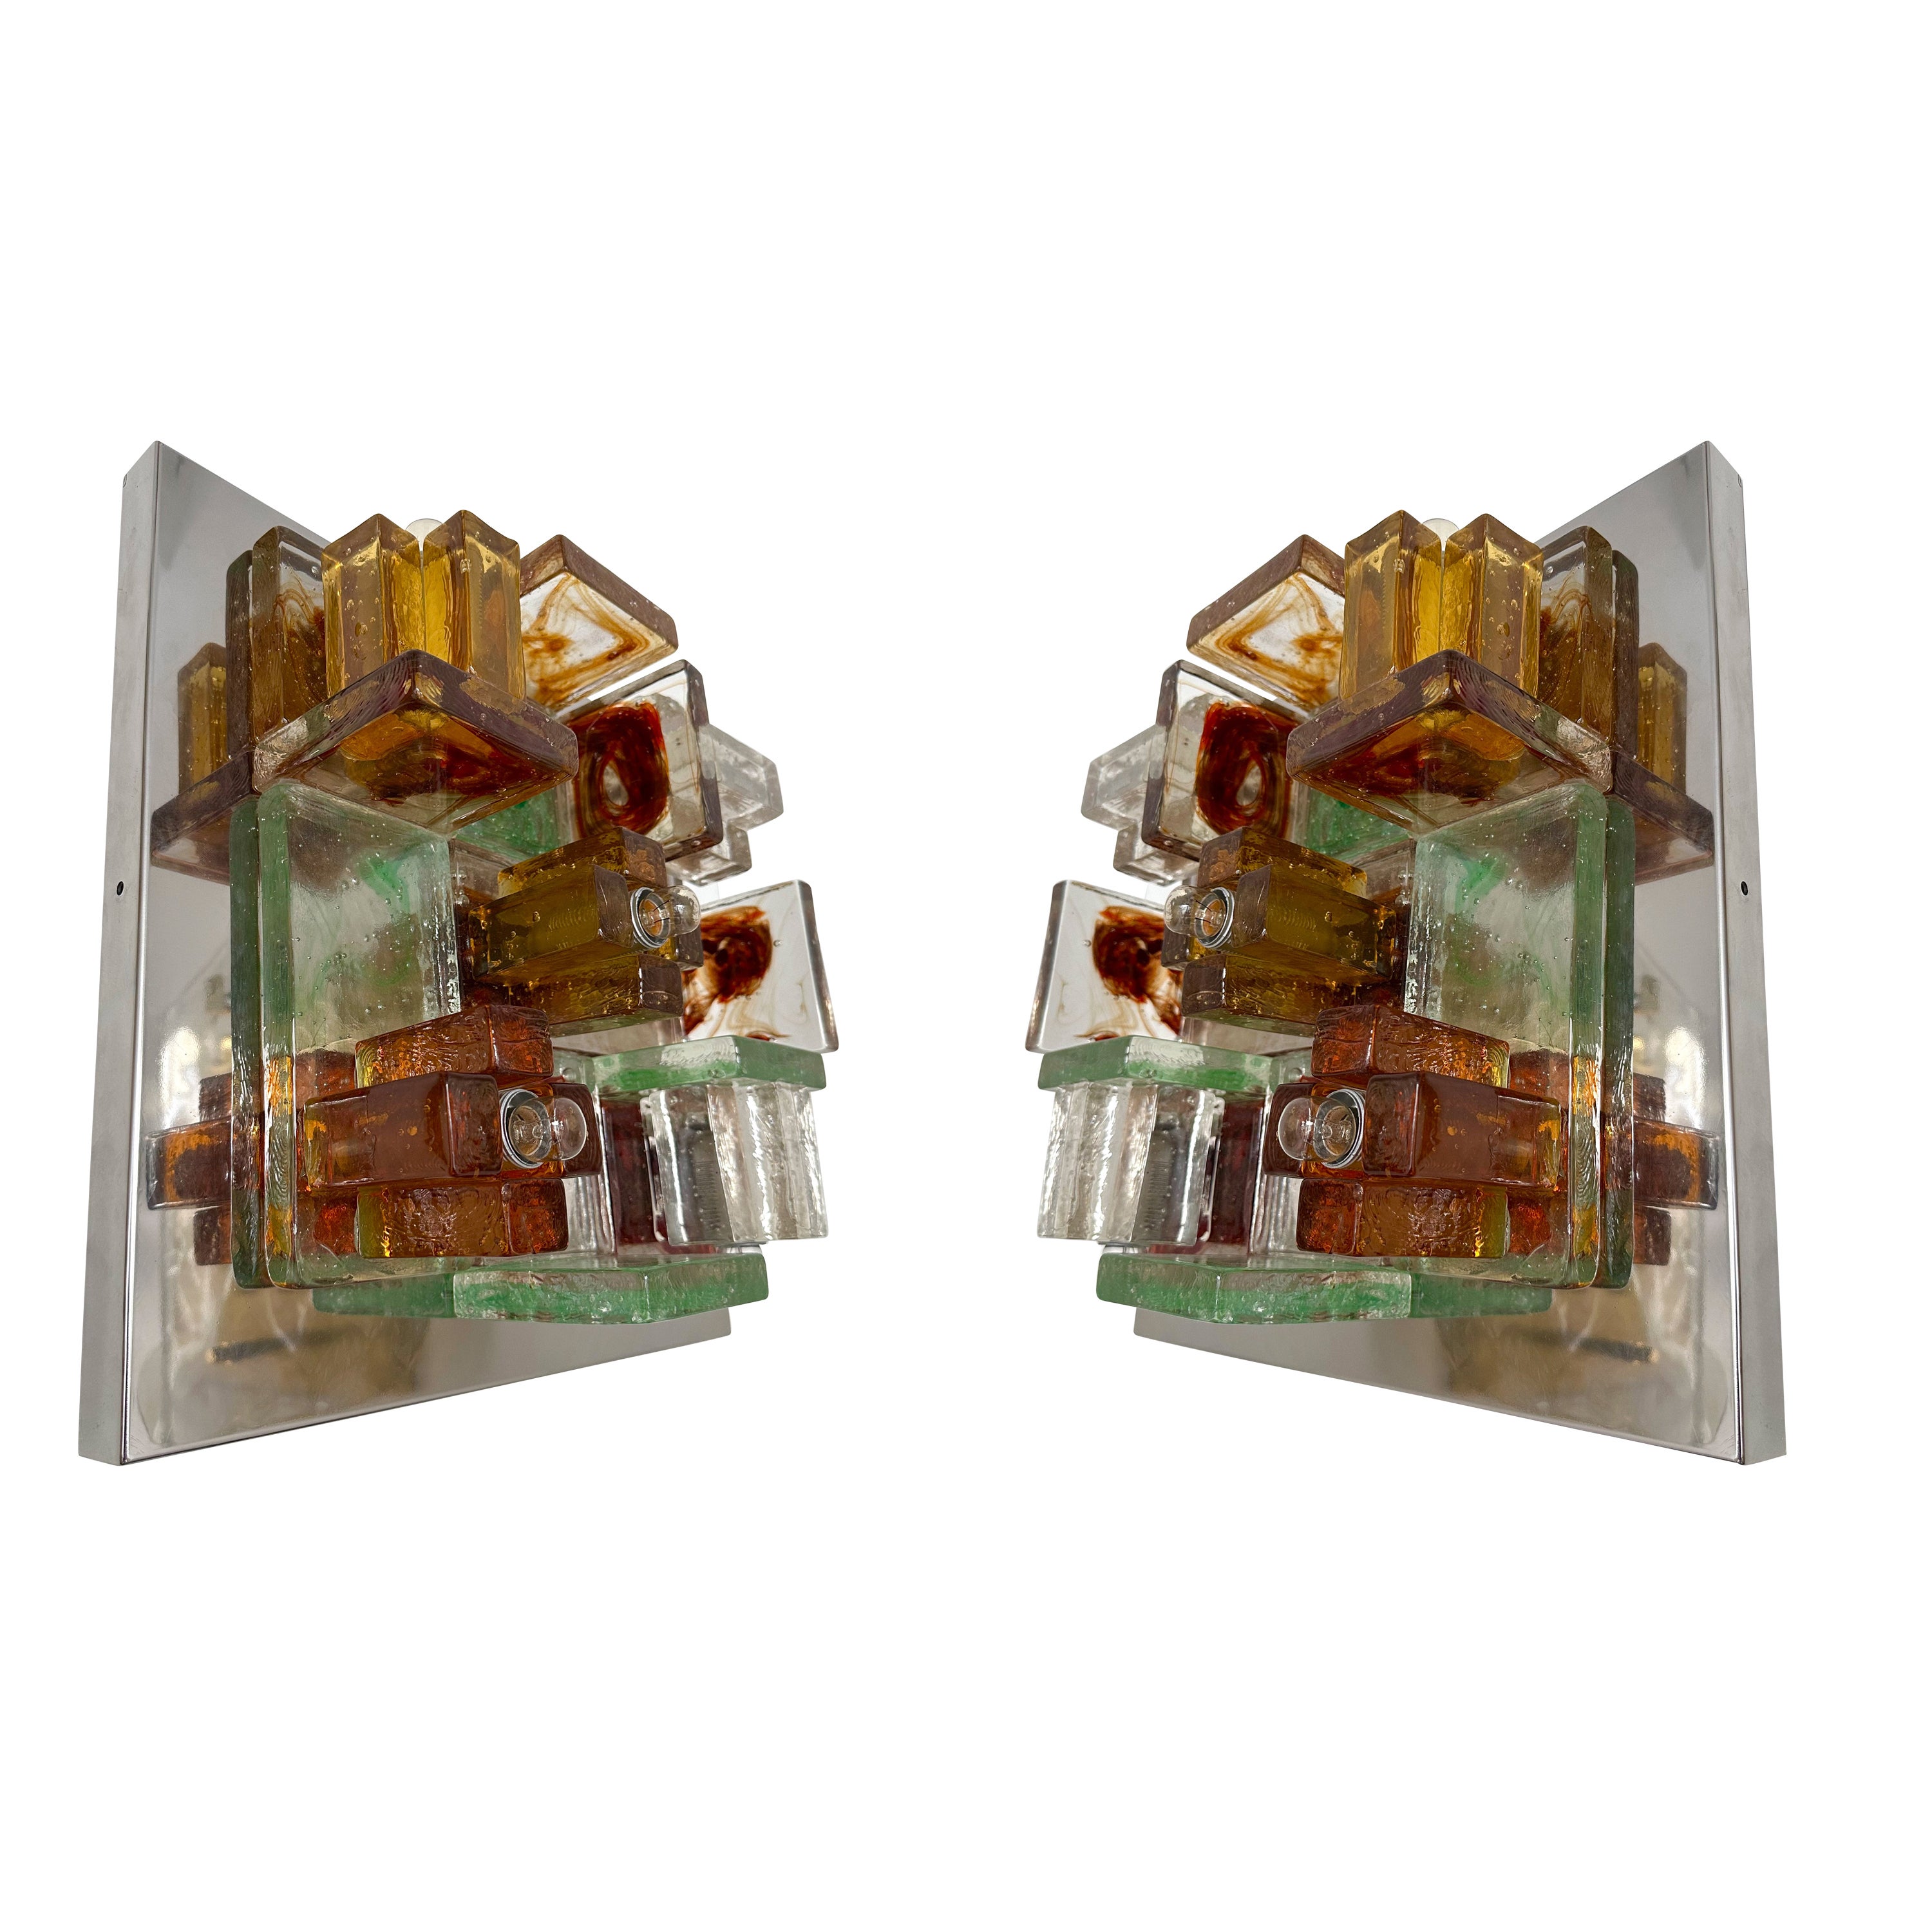 Pair of Geometry Glass Construction Metal Sconces by Poliarte, Italy, 1970s For Sale